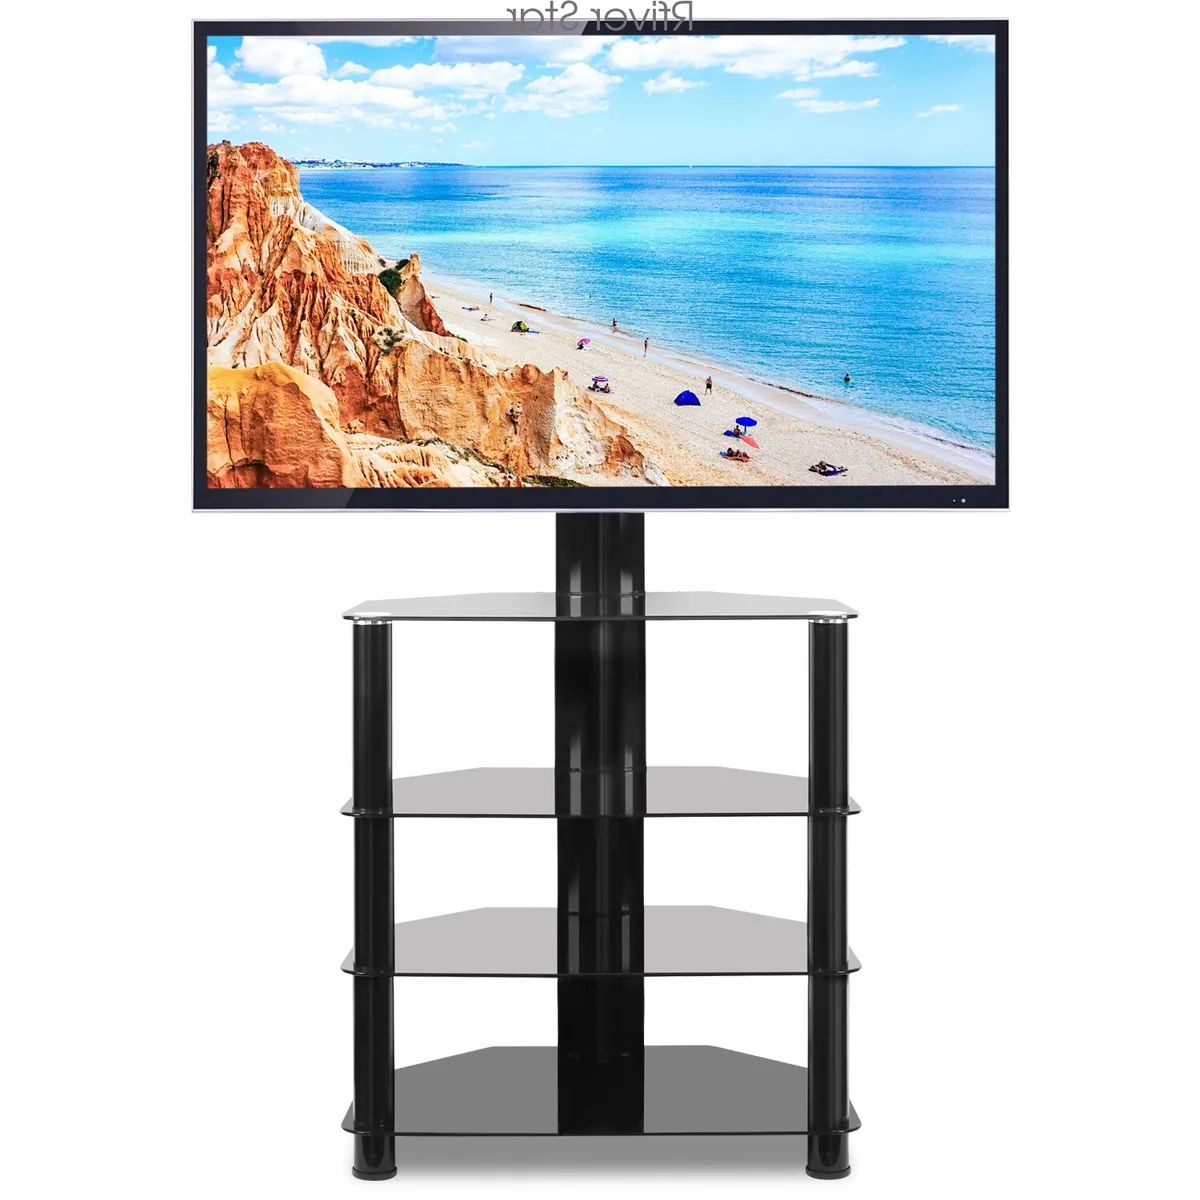 Universal Floor Tv Stand With Swivel Mount And 4 Shelves For 32" 55" Tvs |  Ebay For Universal Floor Tv Stands (View 2 of 20)